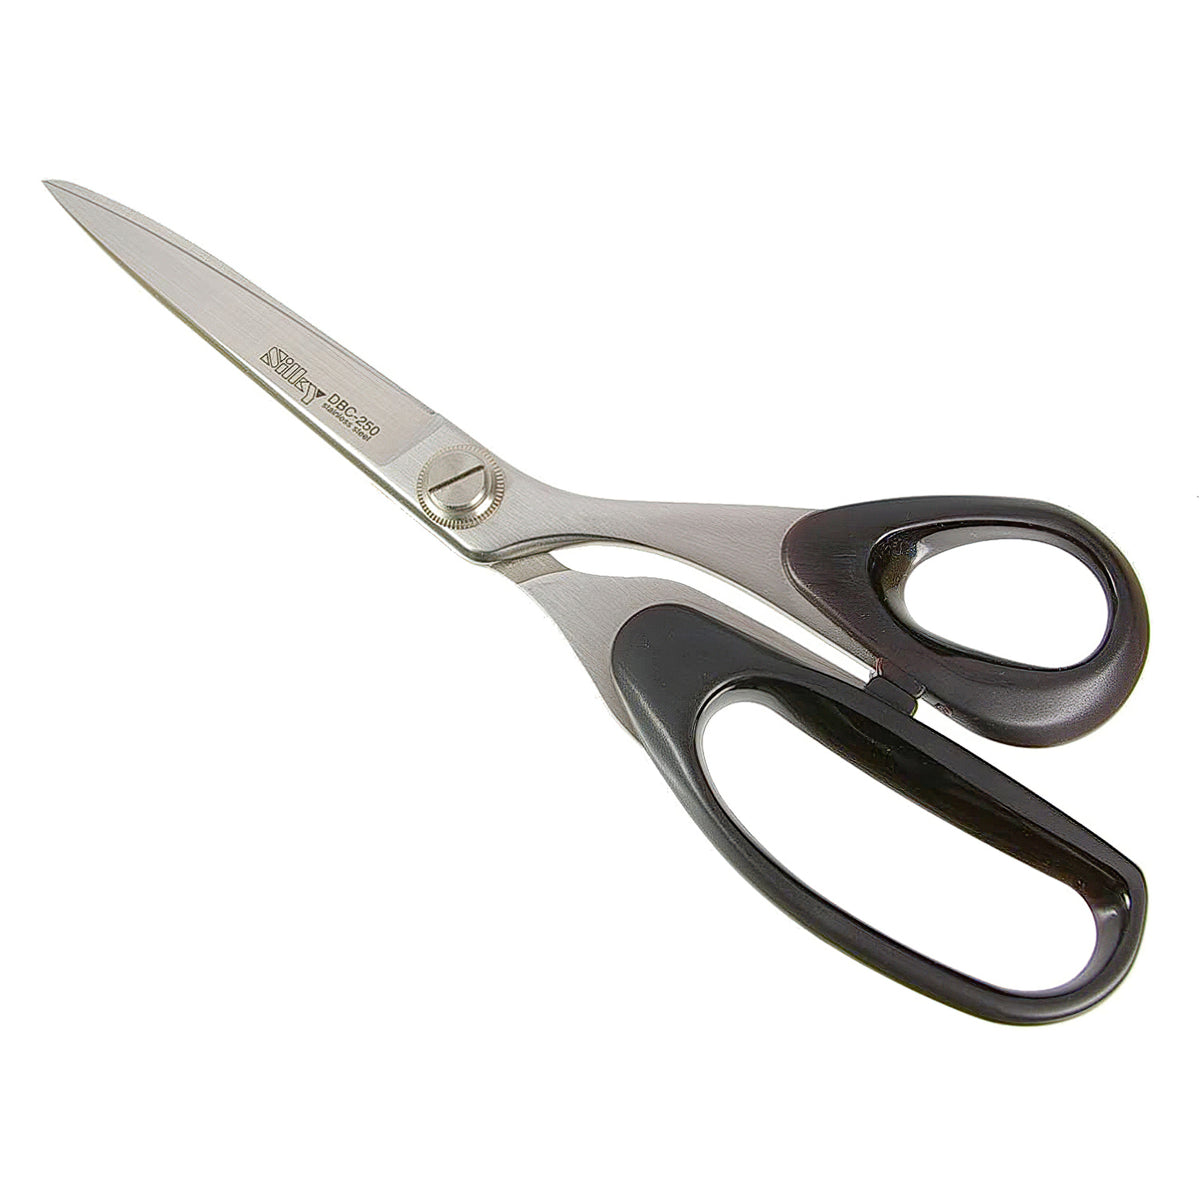 Marusho SILKY Stainless Steel Sewing Scissors